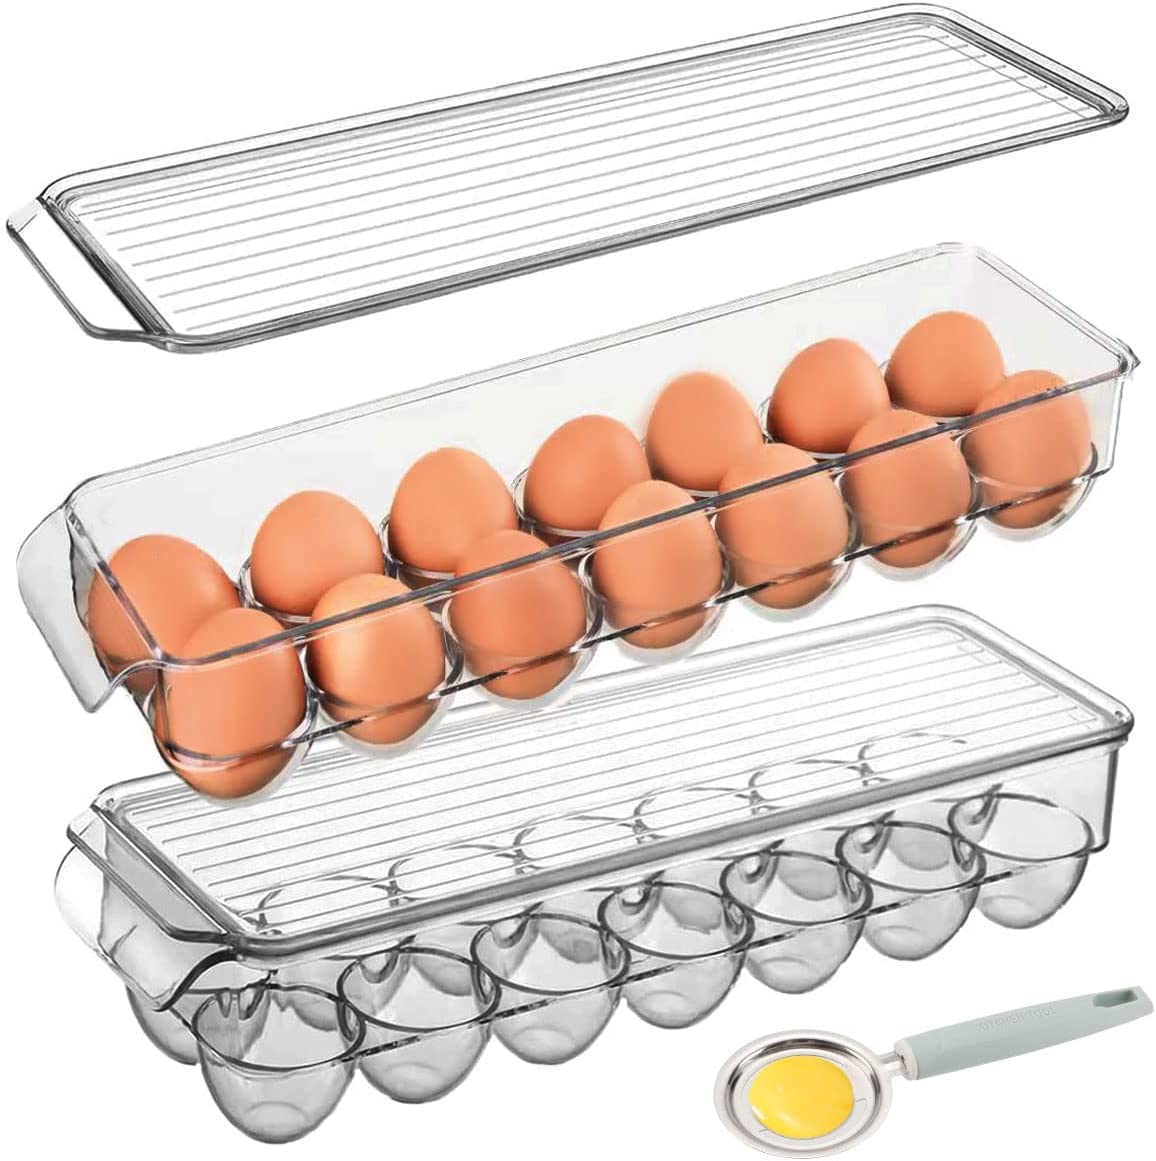 LIHABILAL Egg Holder for Refrigerator – Premium Thick Clear Egg Container Bins with Lids – 2 Pack Stackable 14 Egg Storage Box-Food Grade Plastic Egg Organizer Tray